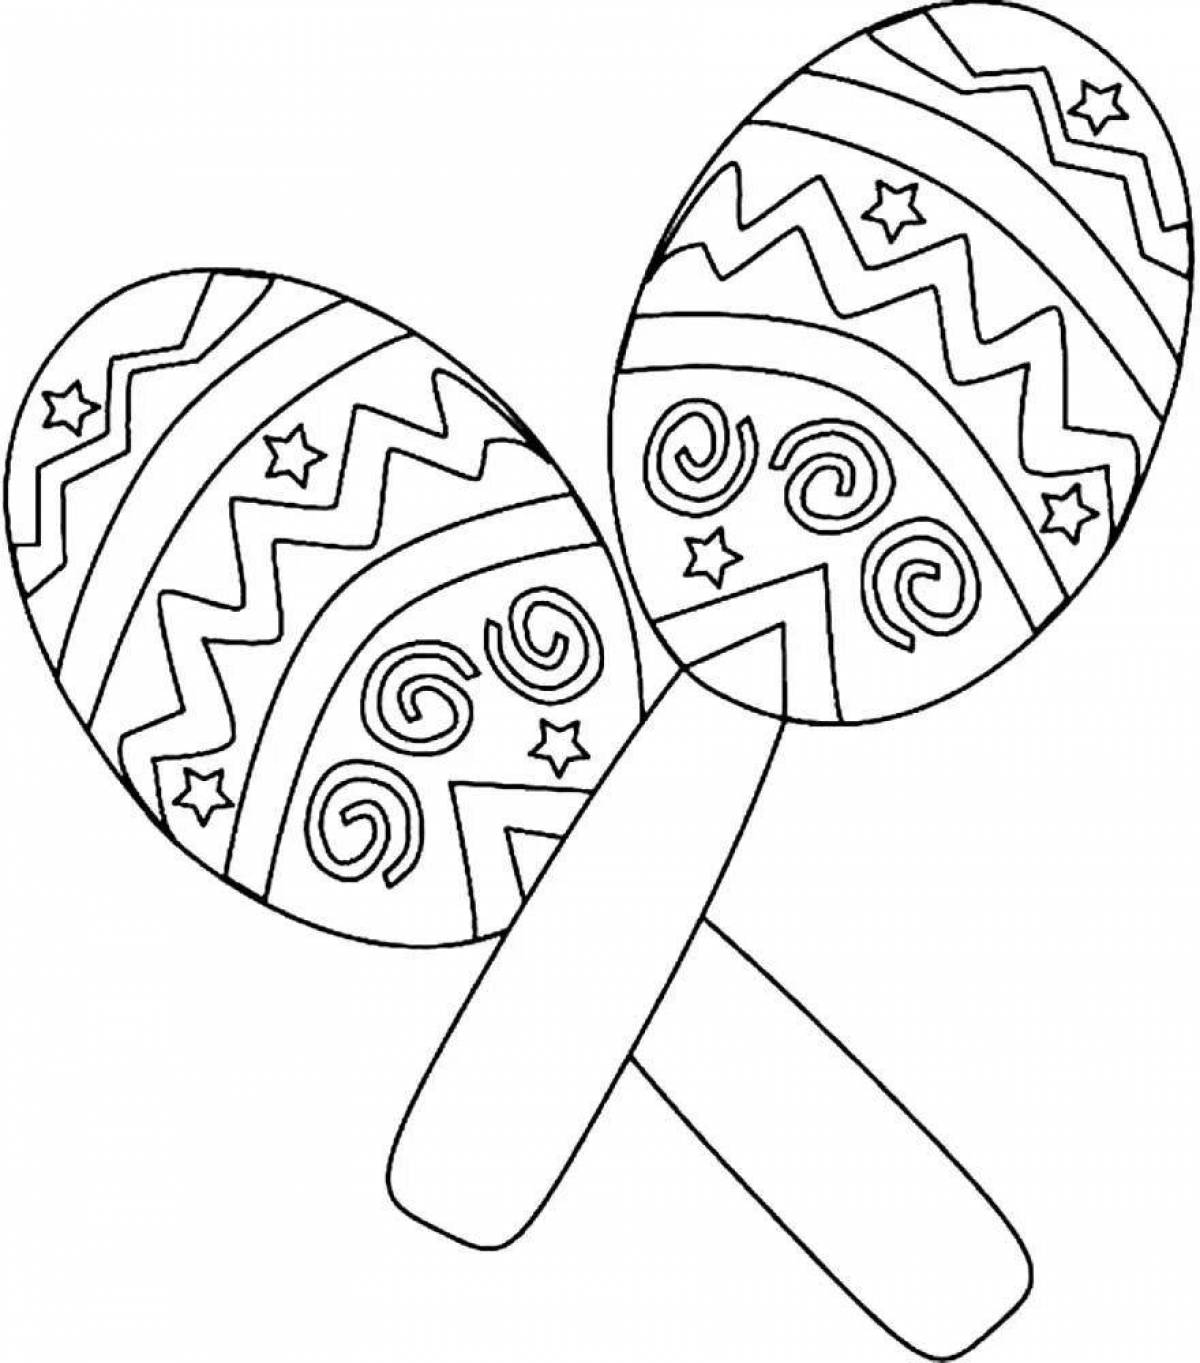 Bright spoons for Russian folk instruments